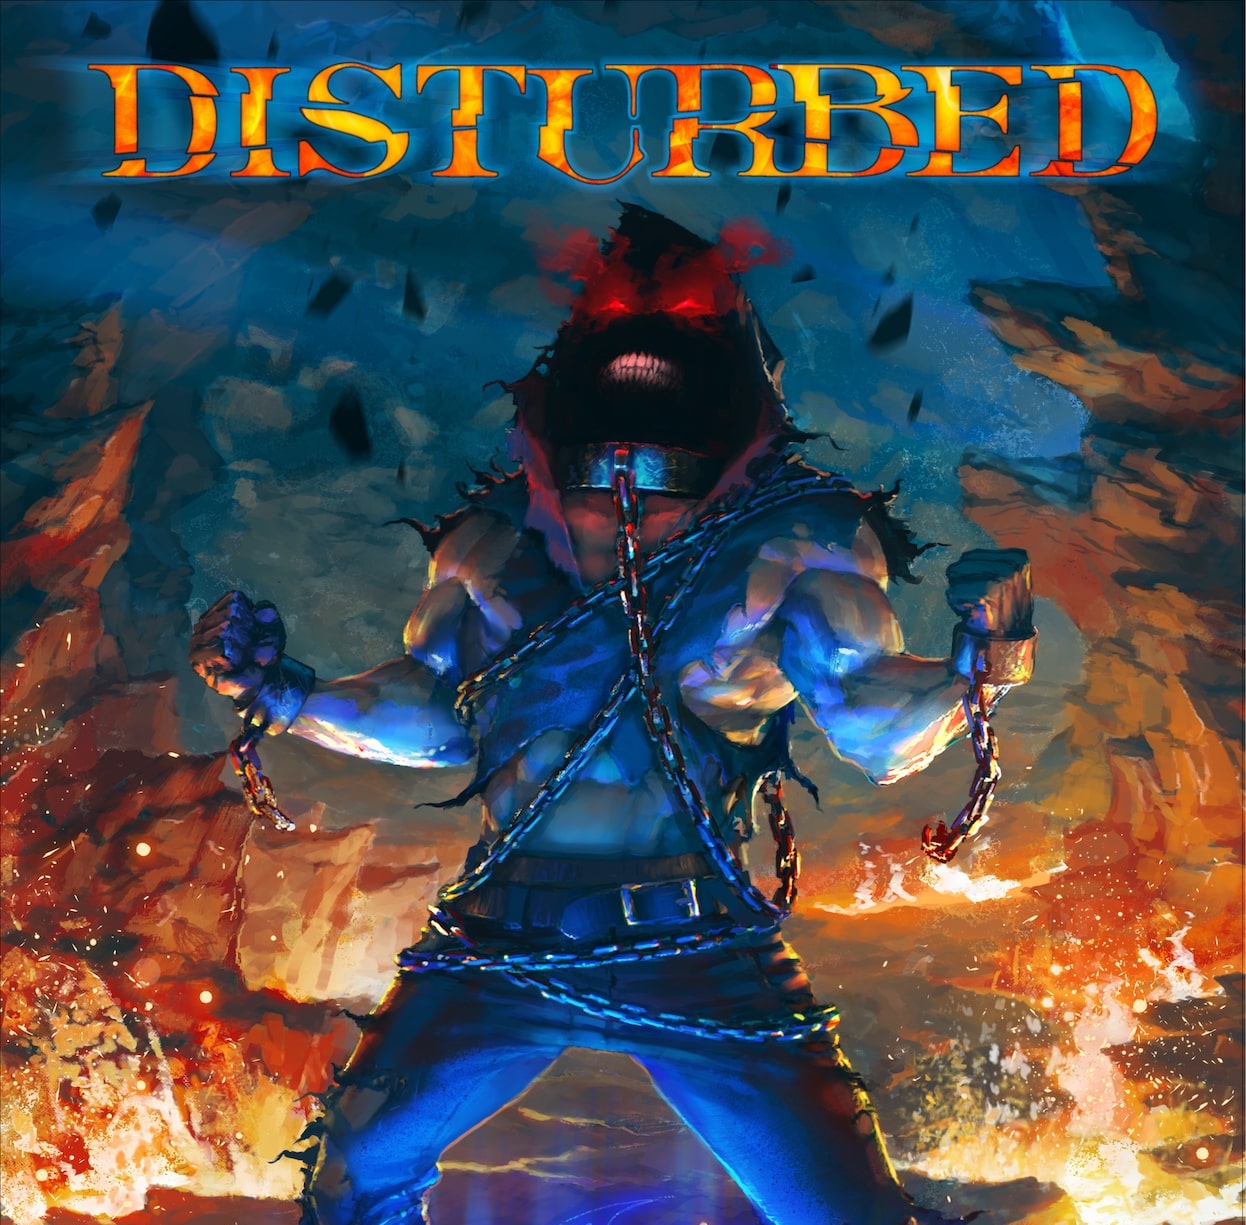 Heavy Metal and Incendium team up with Disturbed for 'Dark Messiah'